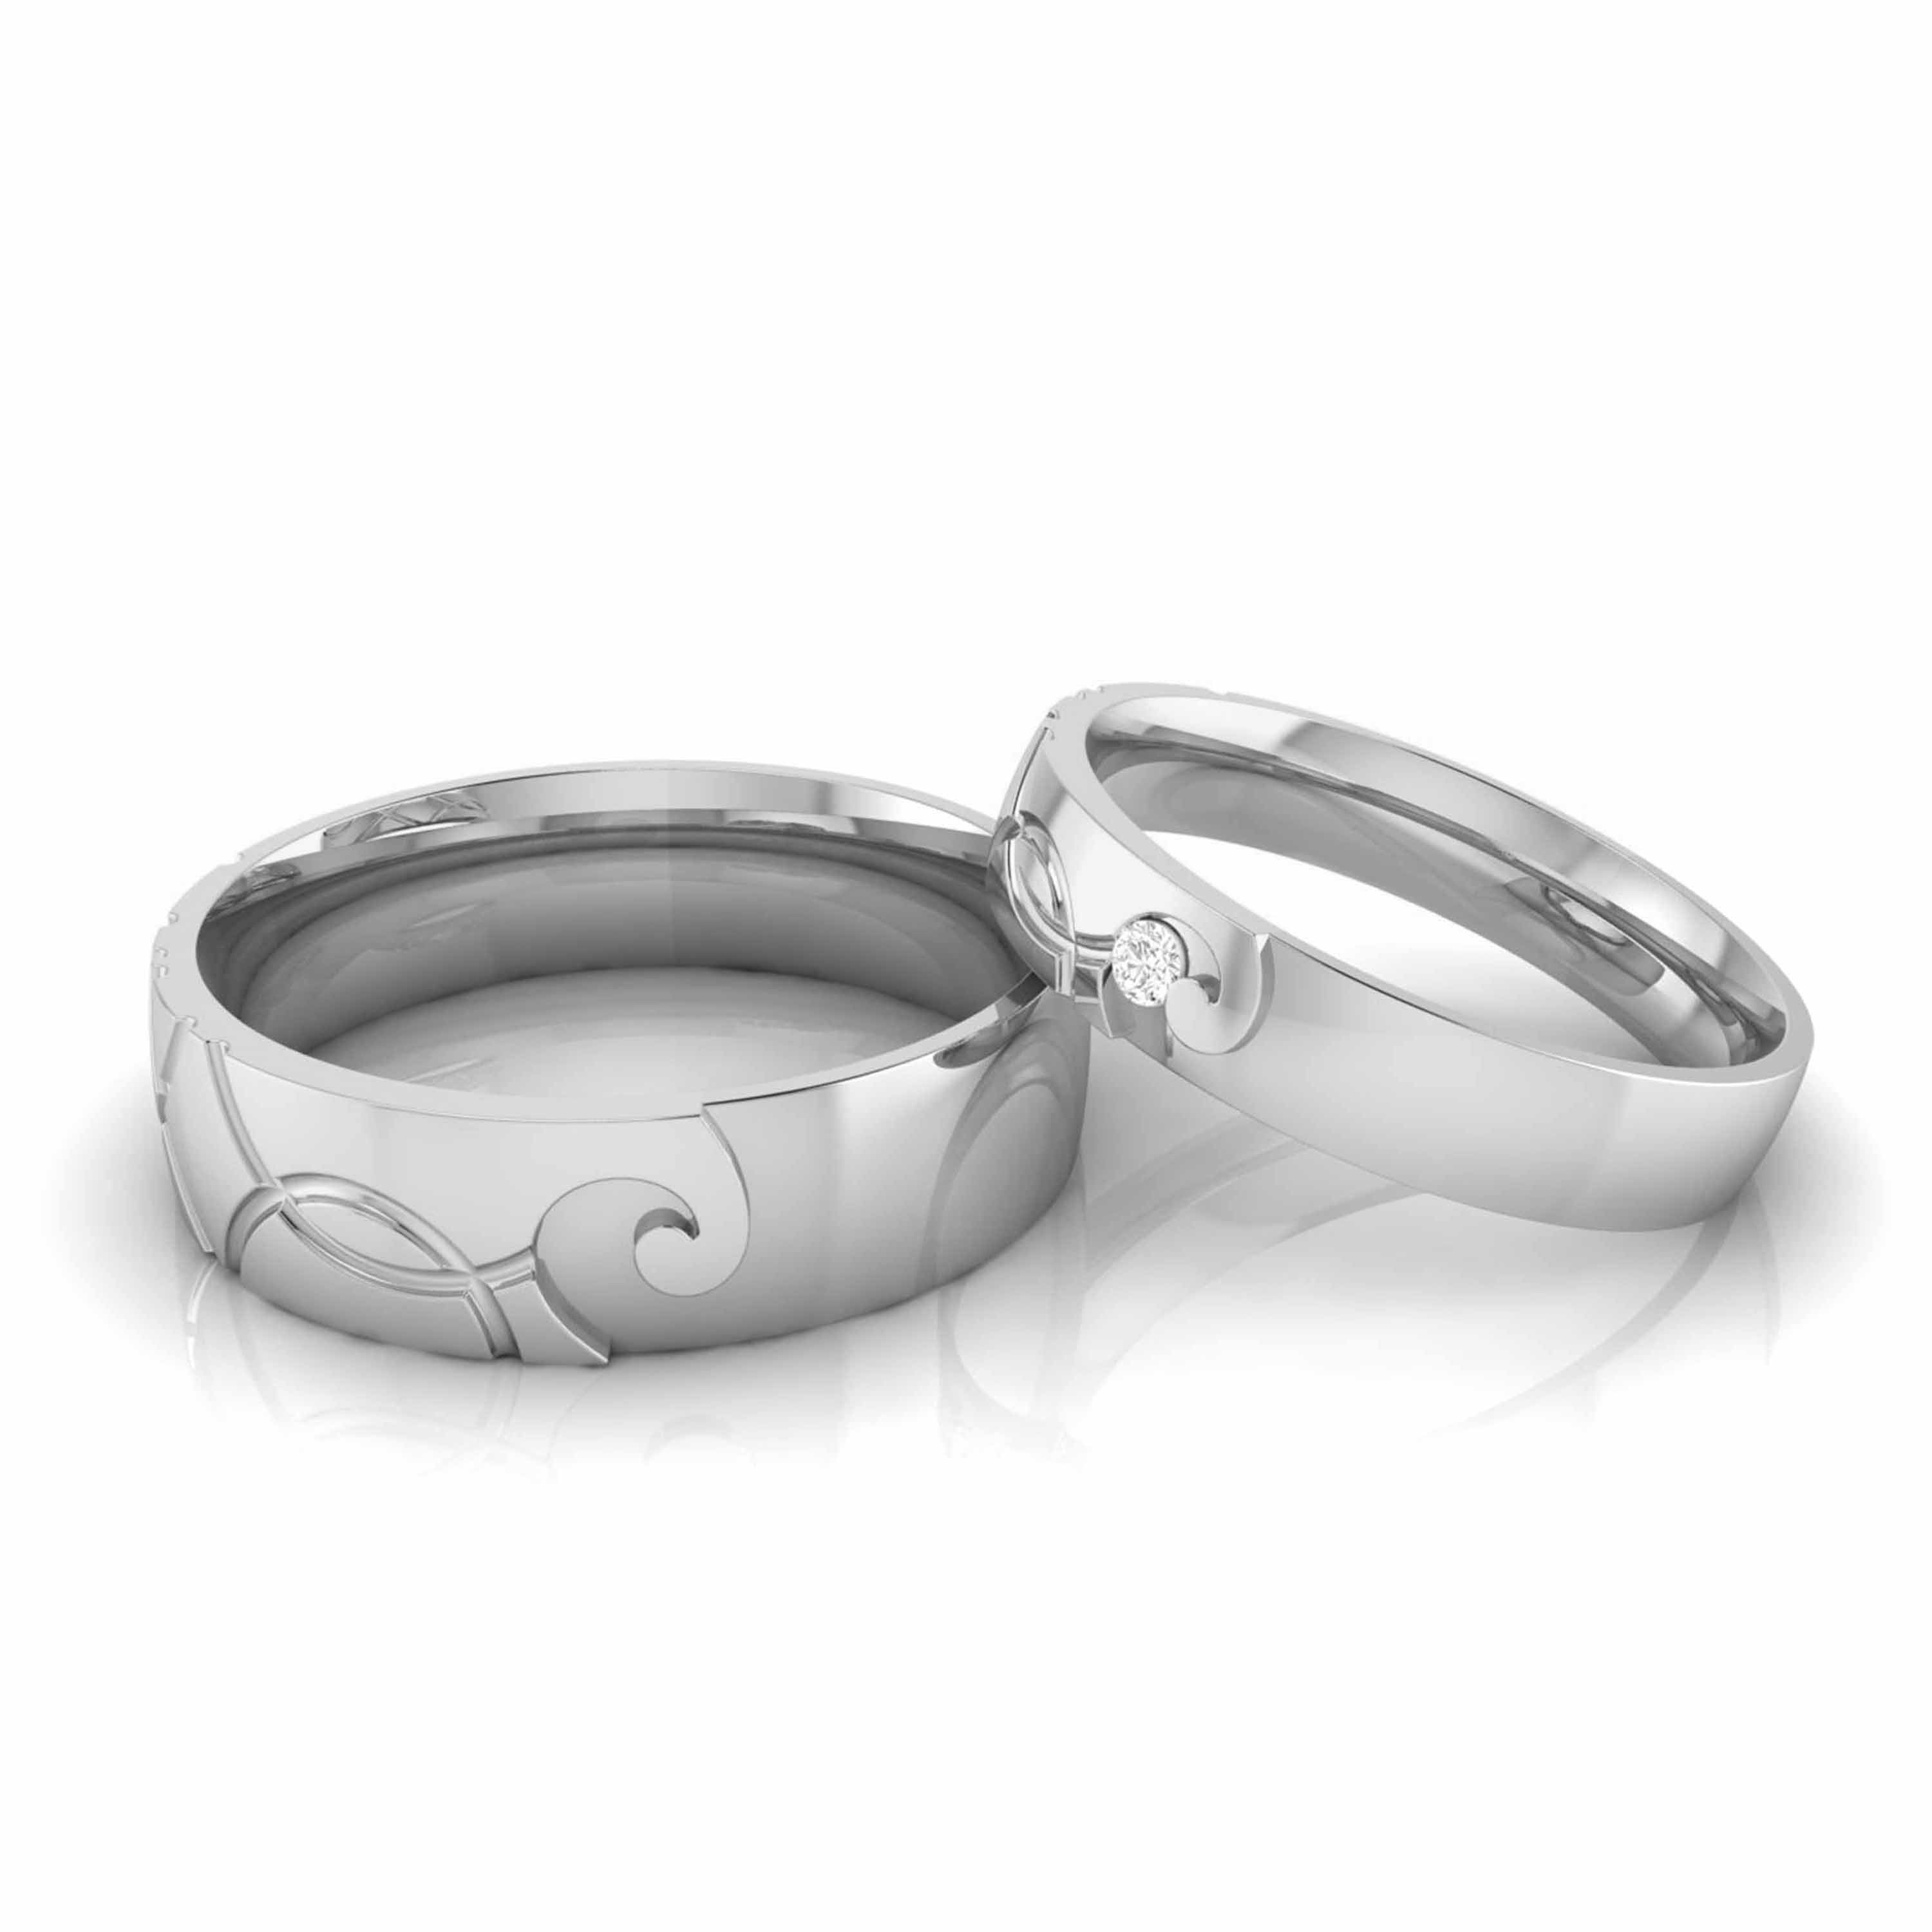 Platinum Rings for Couples with Single Diamonds JL PT 590 | Love Bands |  Couple wedding rings, Couple ring design, Engagement rings couple